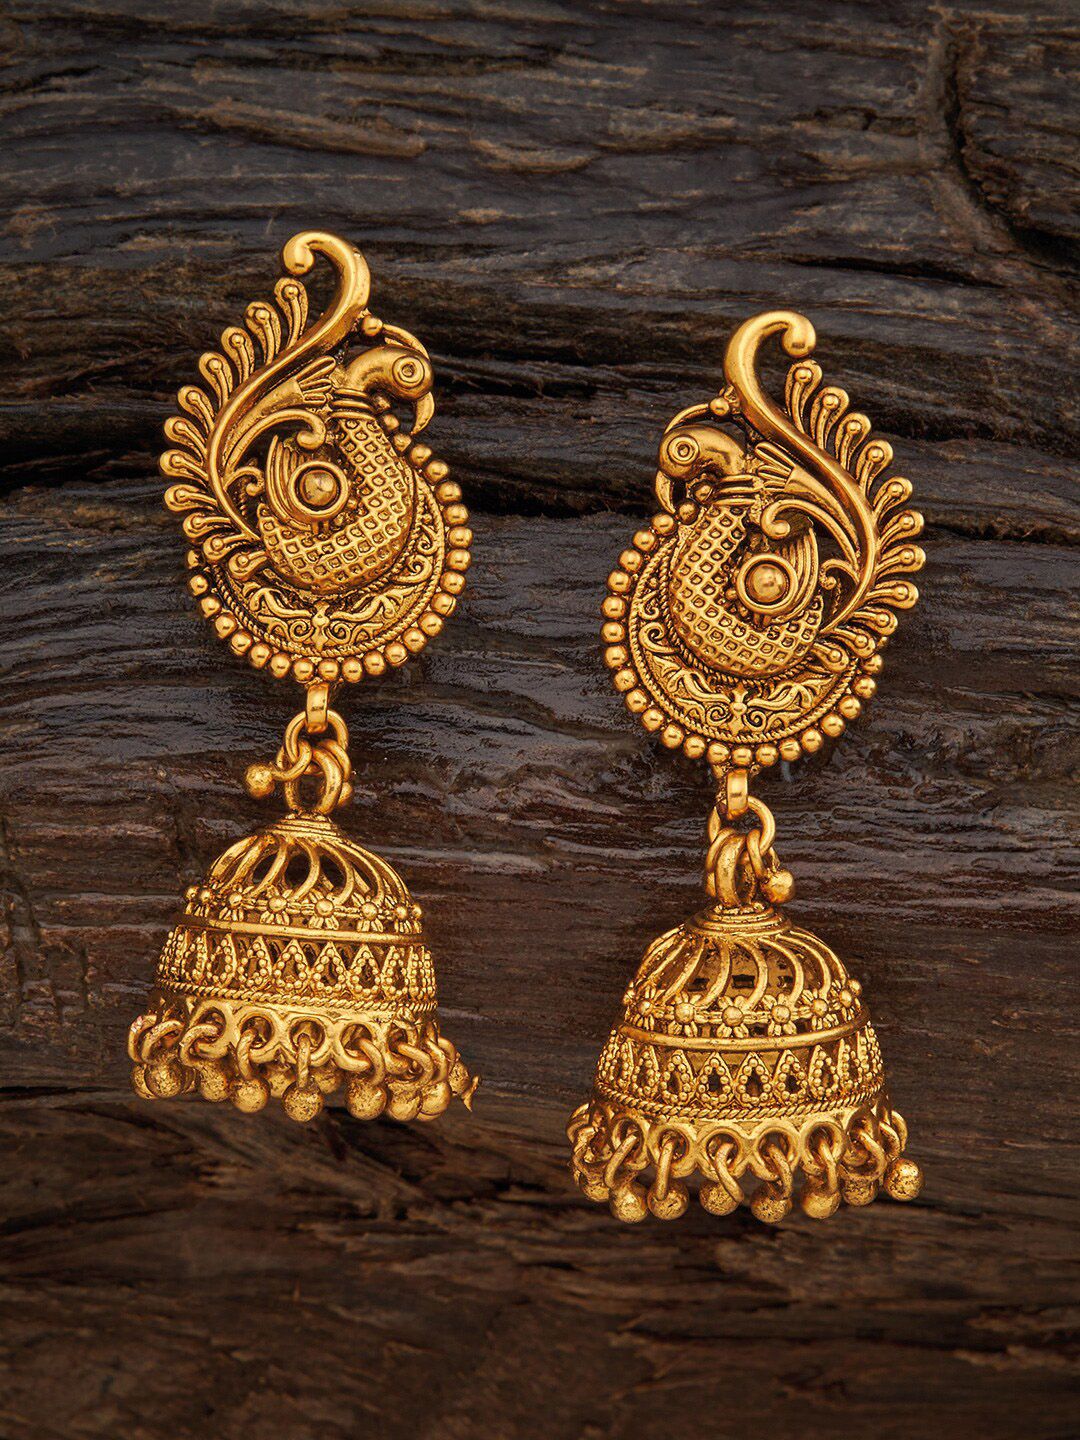 Kushal's Fashion Jewellery Gold-Toned Peacock Shaped Jhumkas Earrings Price in India